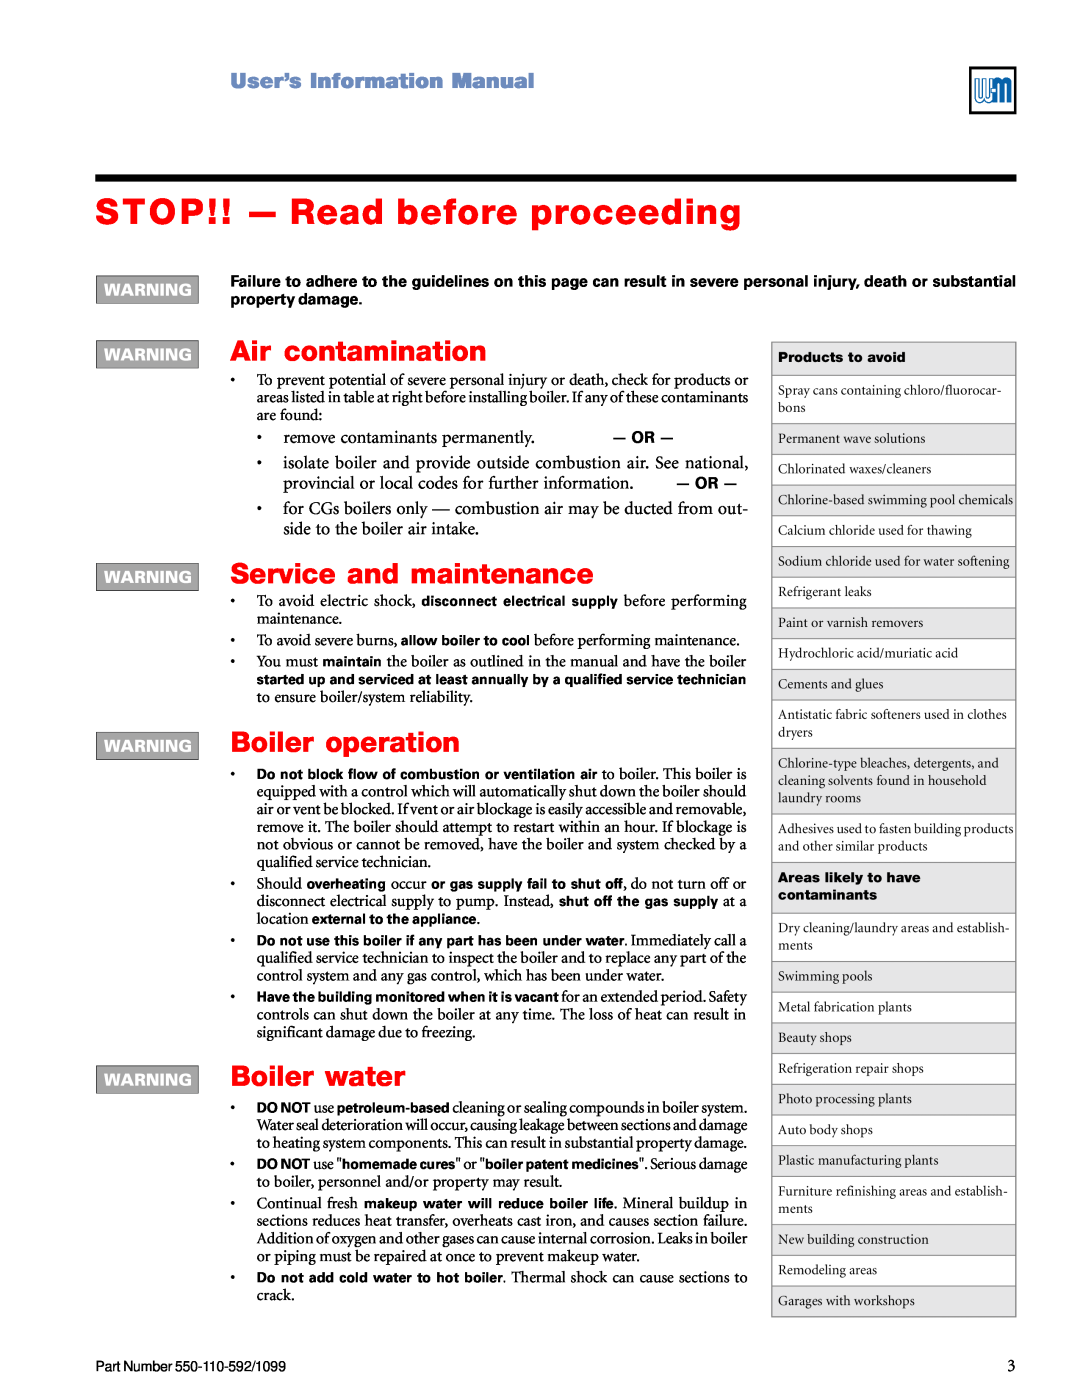 Weil-McLain CGa UserísInformationManual, STOP!! - Read before proceeding, Air contamination, Service and maintenance, Or 